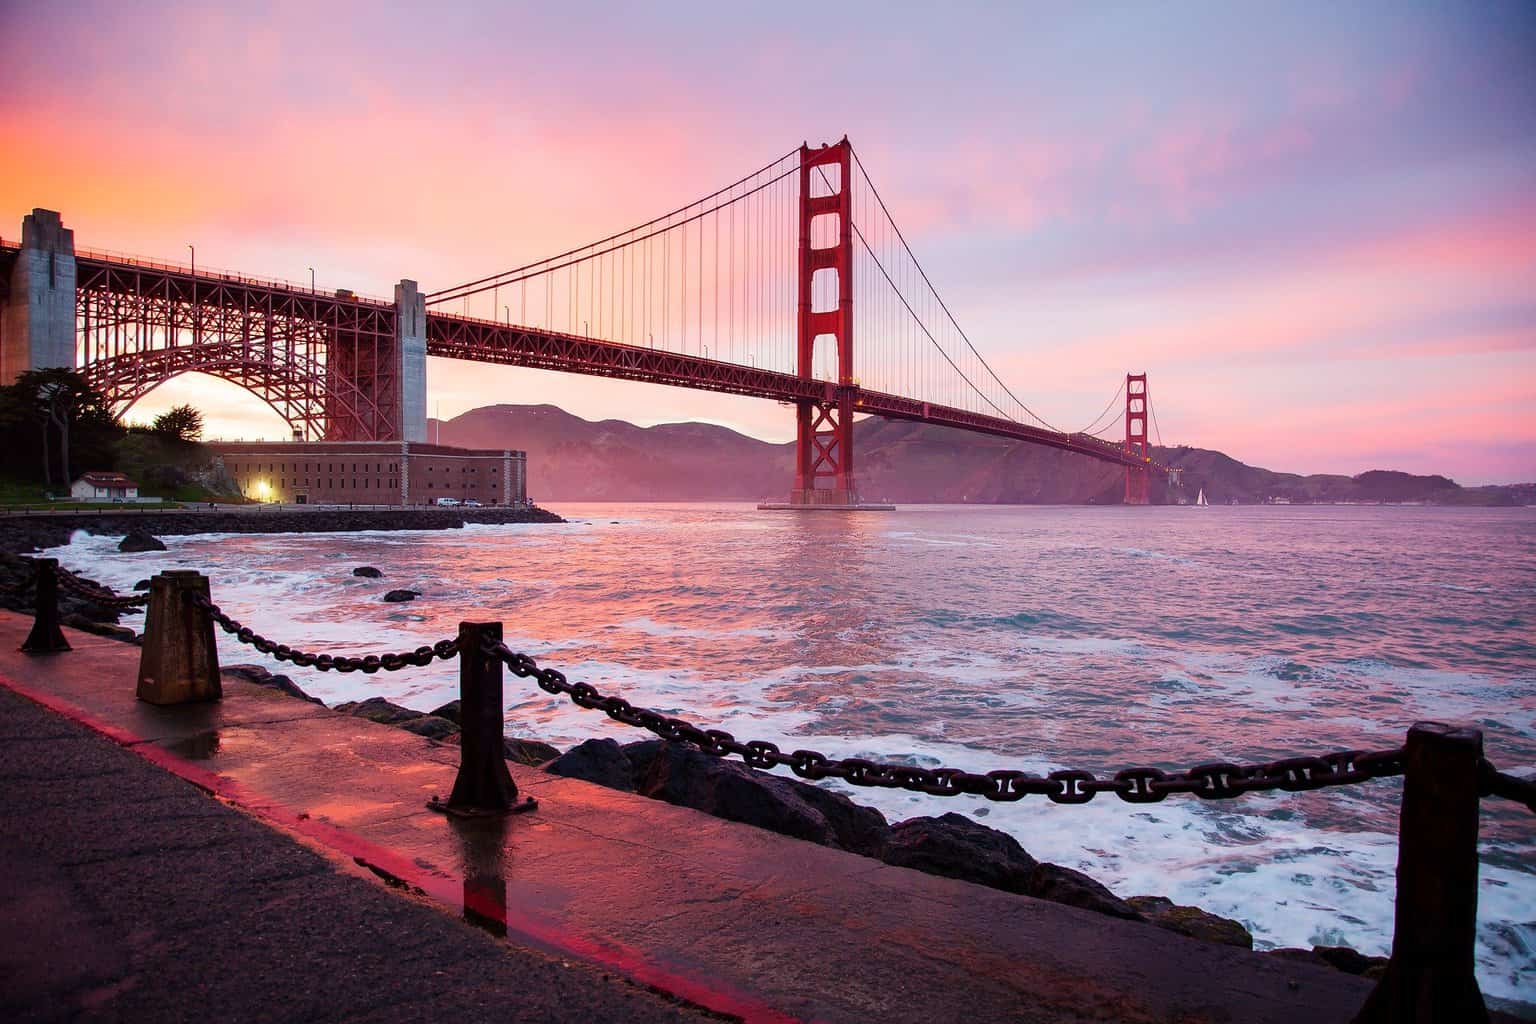 27 Hidden gems in San Francisco you didn’t know about